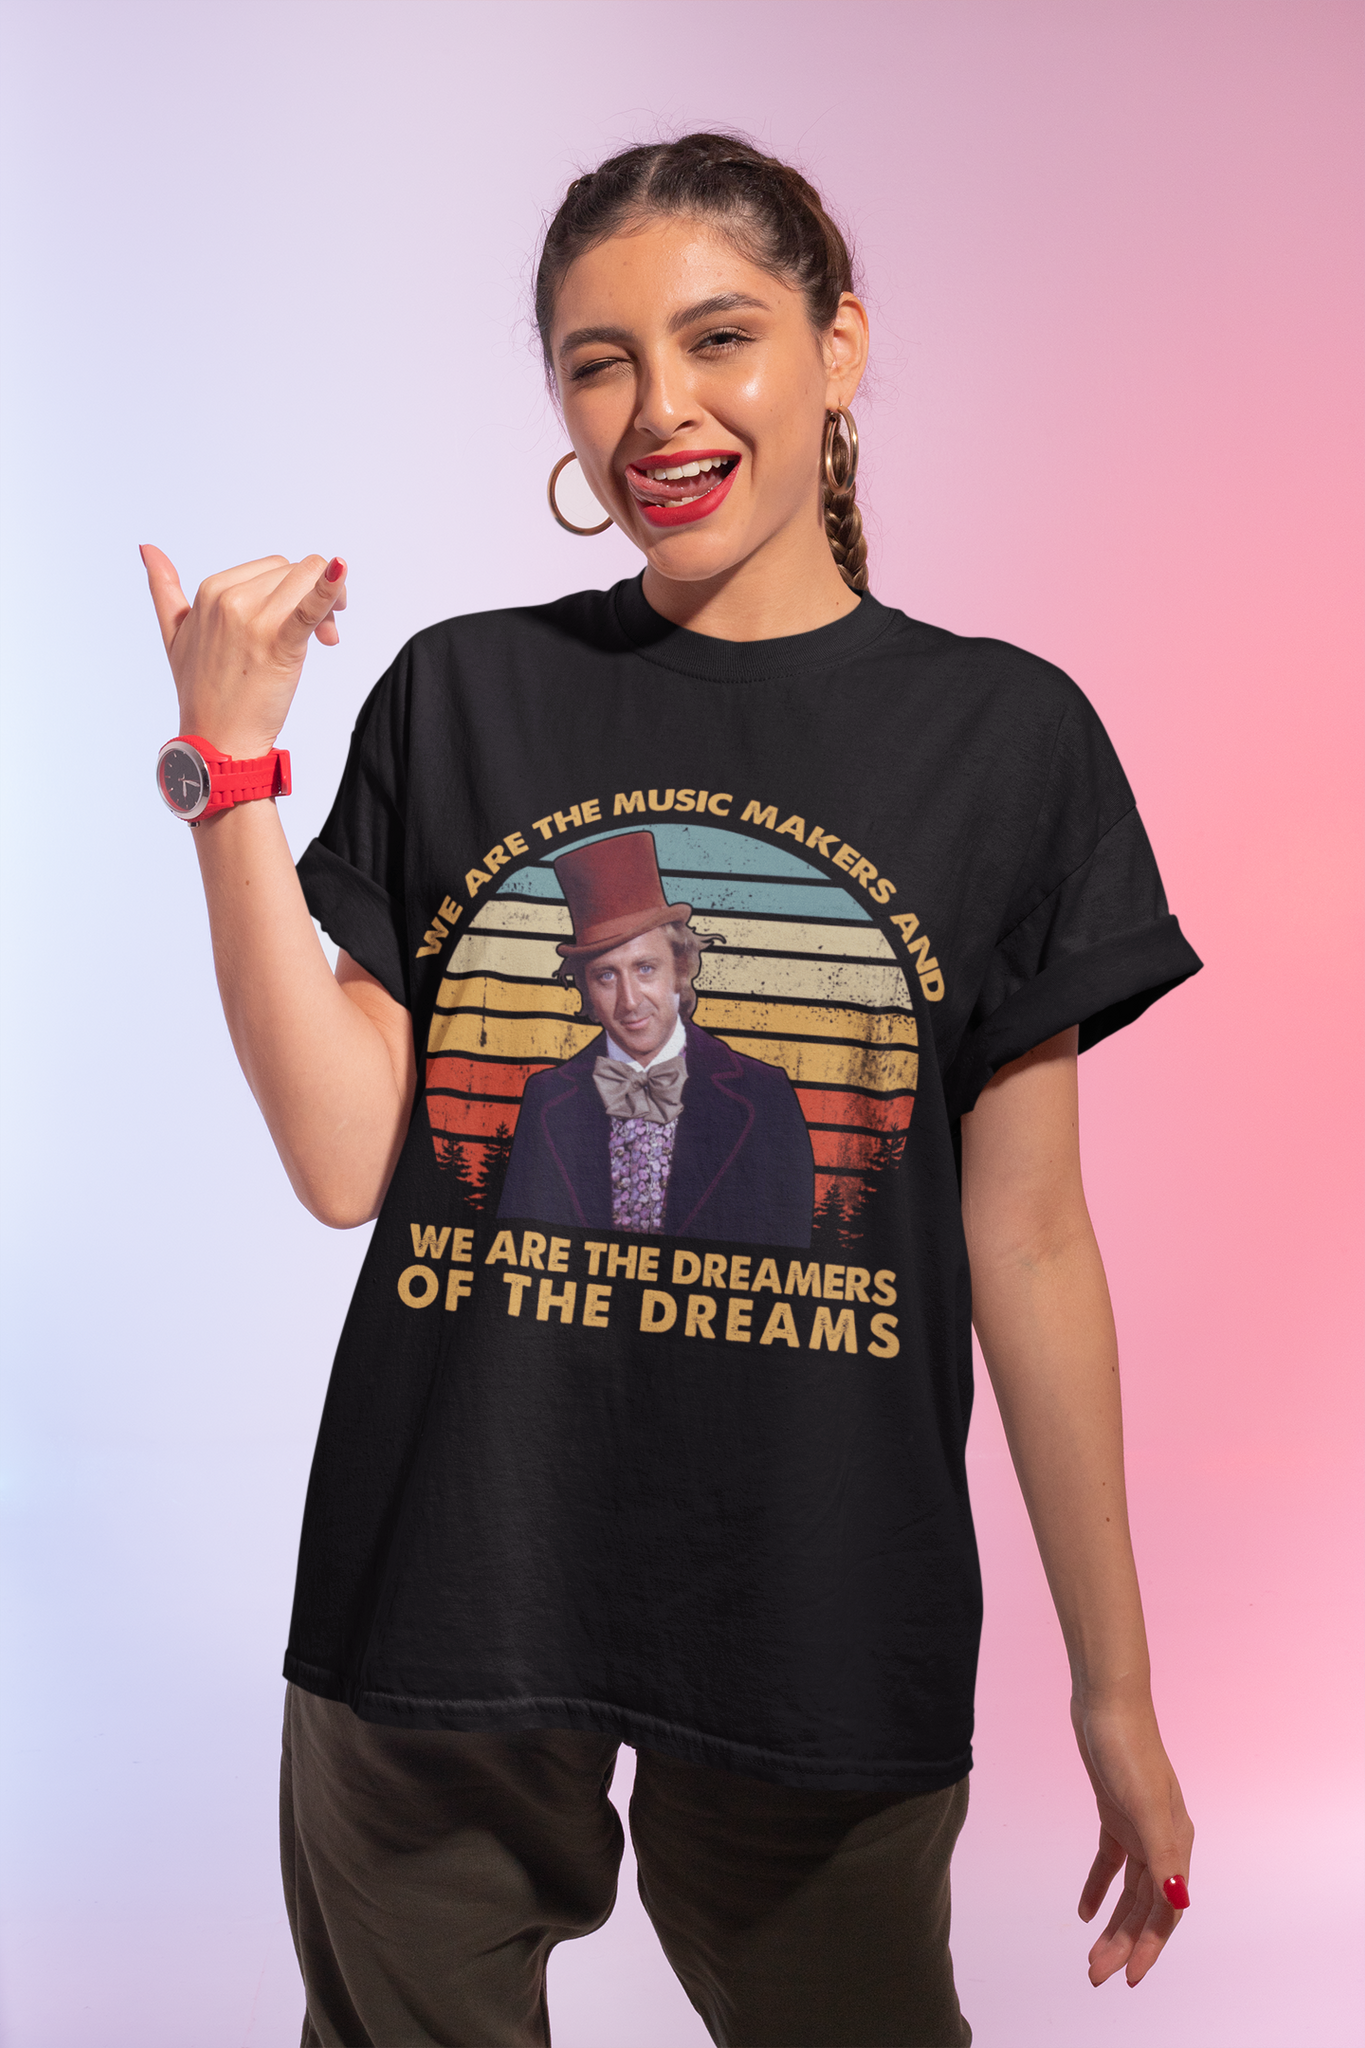 Charlie And The Chocolate Factory Vintage T Shirt, We Are The Dreamers Of The Dreams Tshirt, Willy Wonka T Shirt